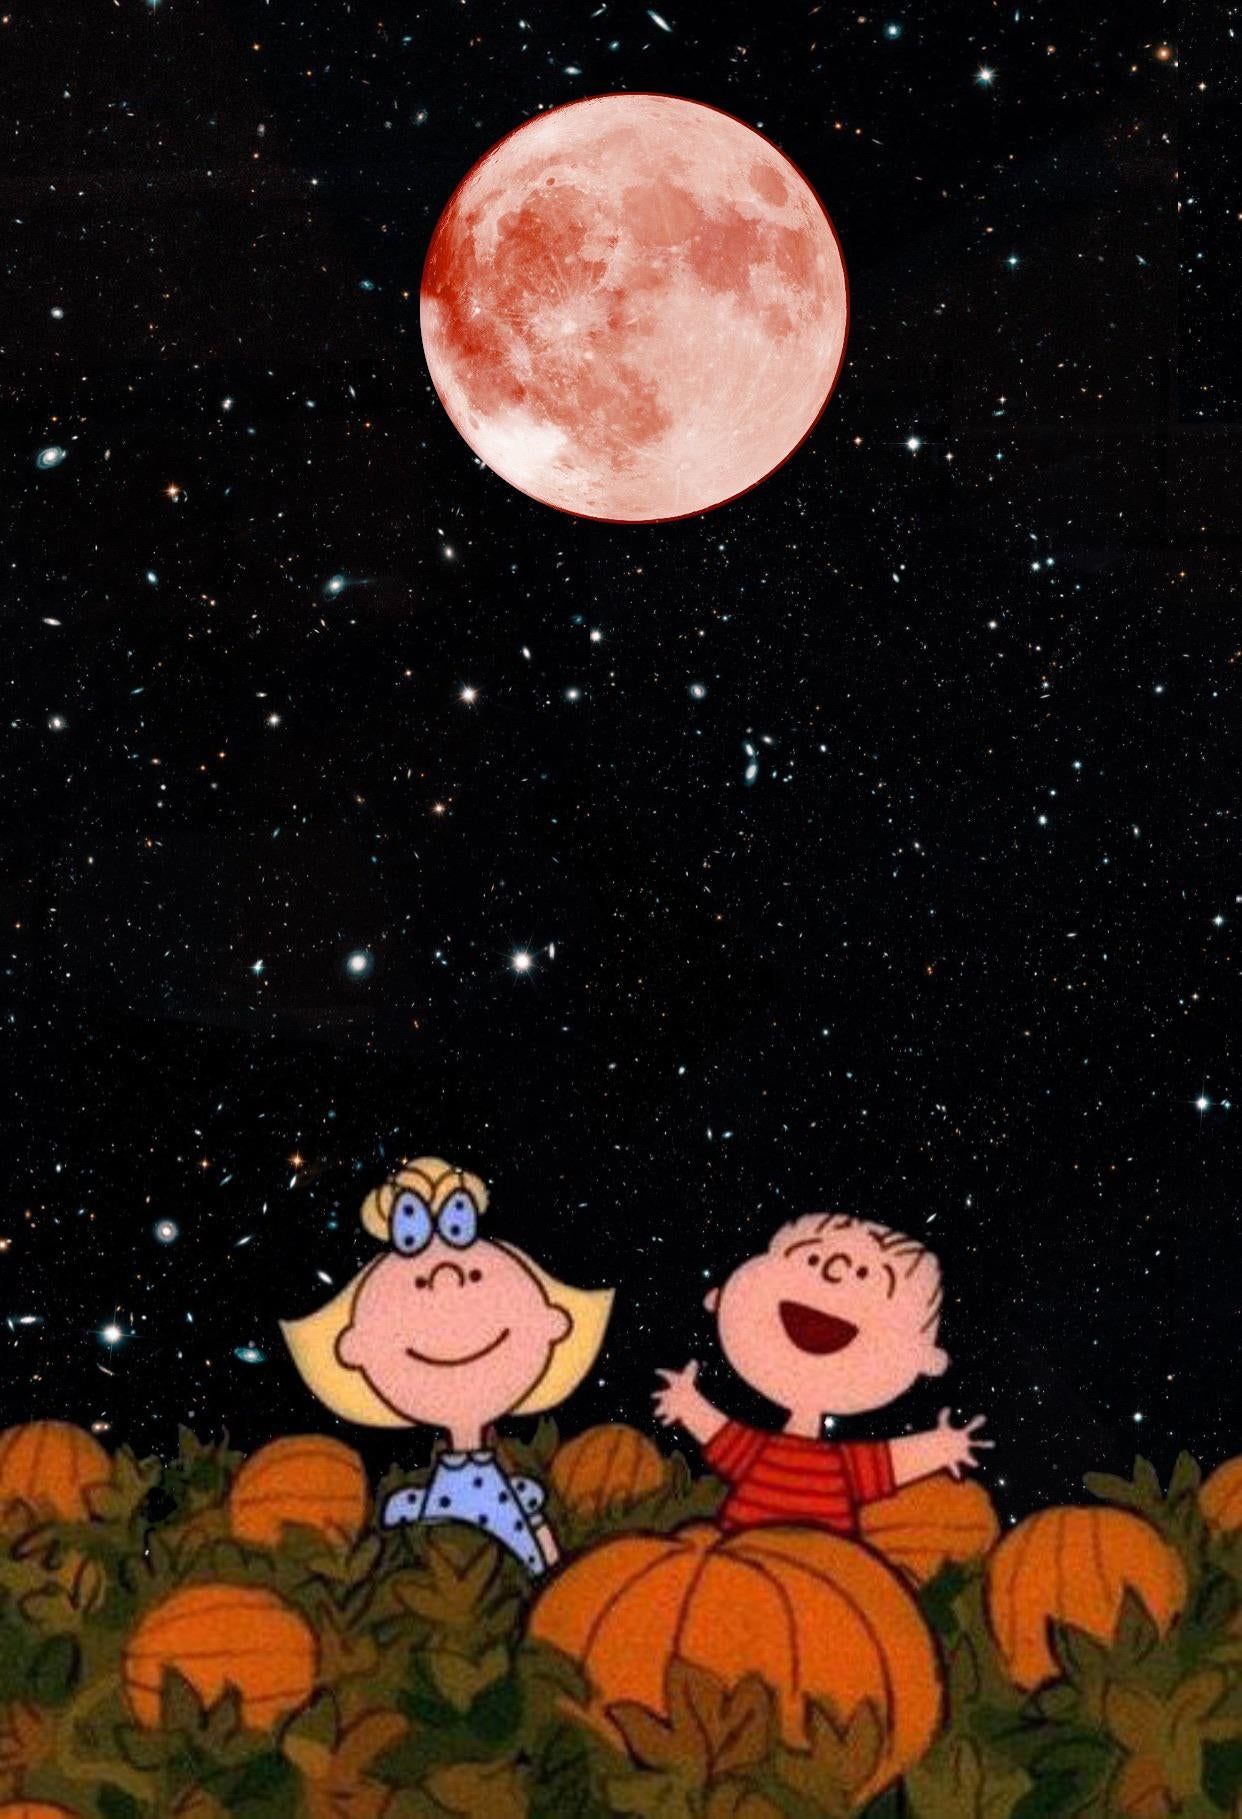 Combined photo from reddit posts to create my wallpaper. Charlie Brown, Hubble Space Telescope, and the first full moon of fall